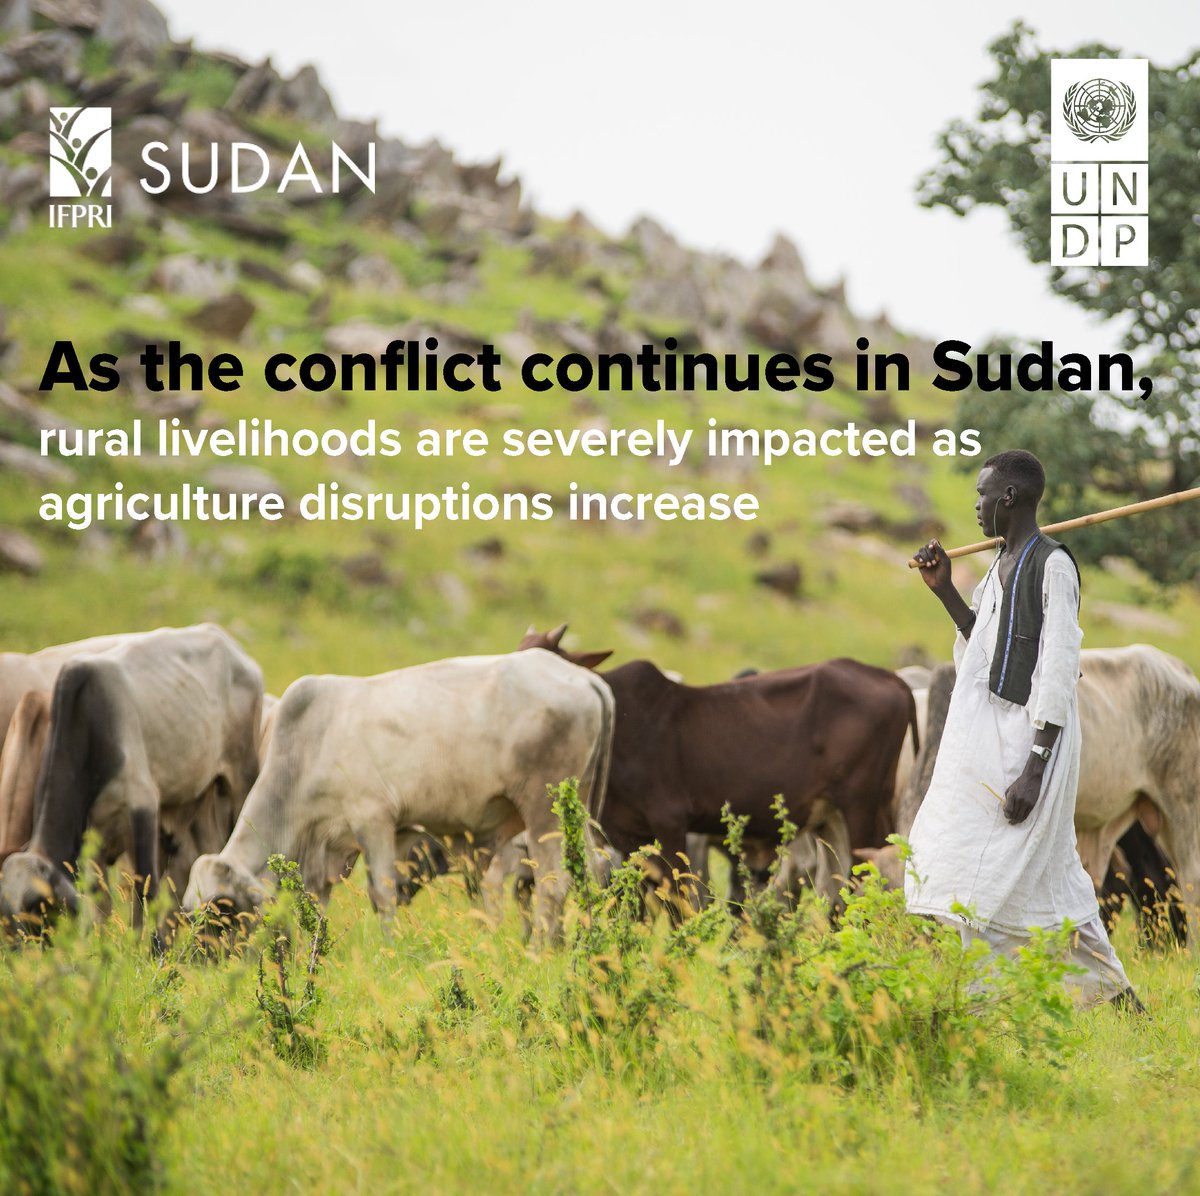 Agriculture, vital for rural livelihoods, has suffered significantly due to conflict in #Sudan 🇸🇩   With sharp reductions in crop cultivation, support for farming activities is needed more than ever for households.   More in @UNDP & @IFPRI’s latest report: bit.ly/4cUYZDa